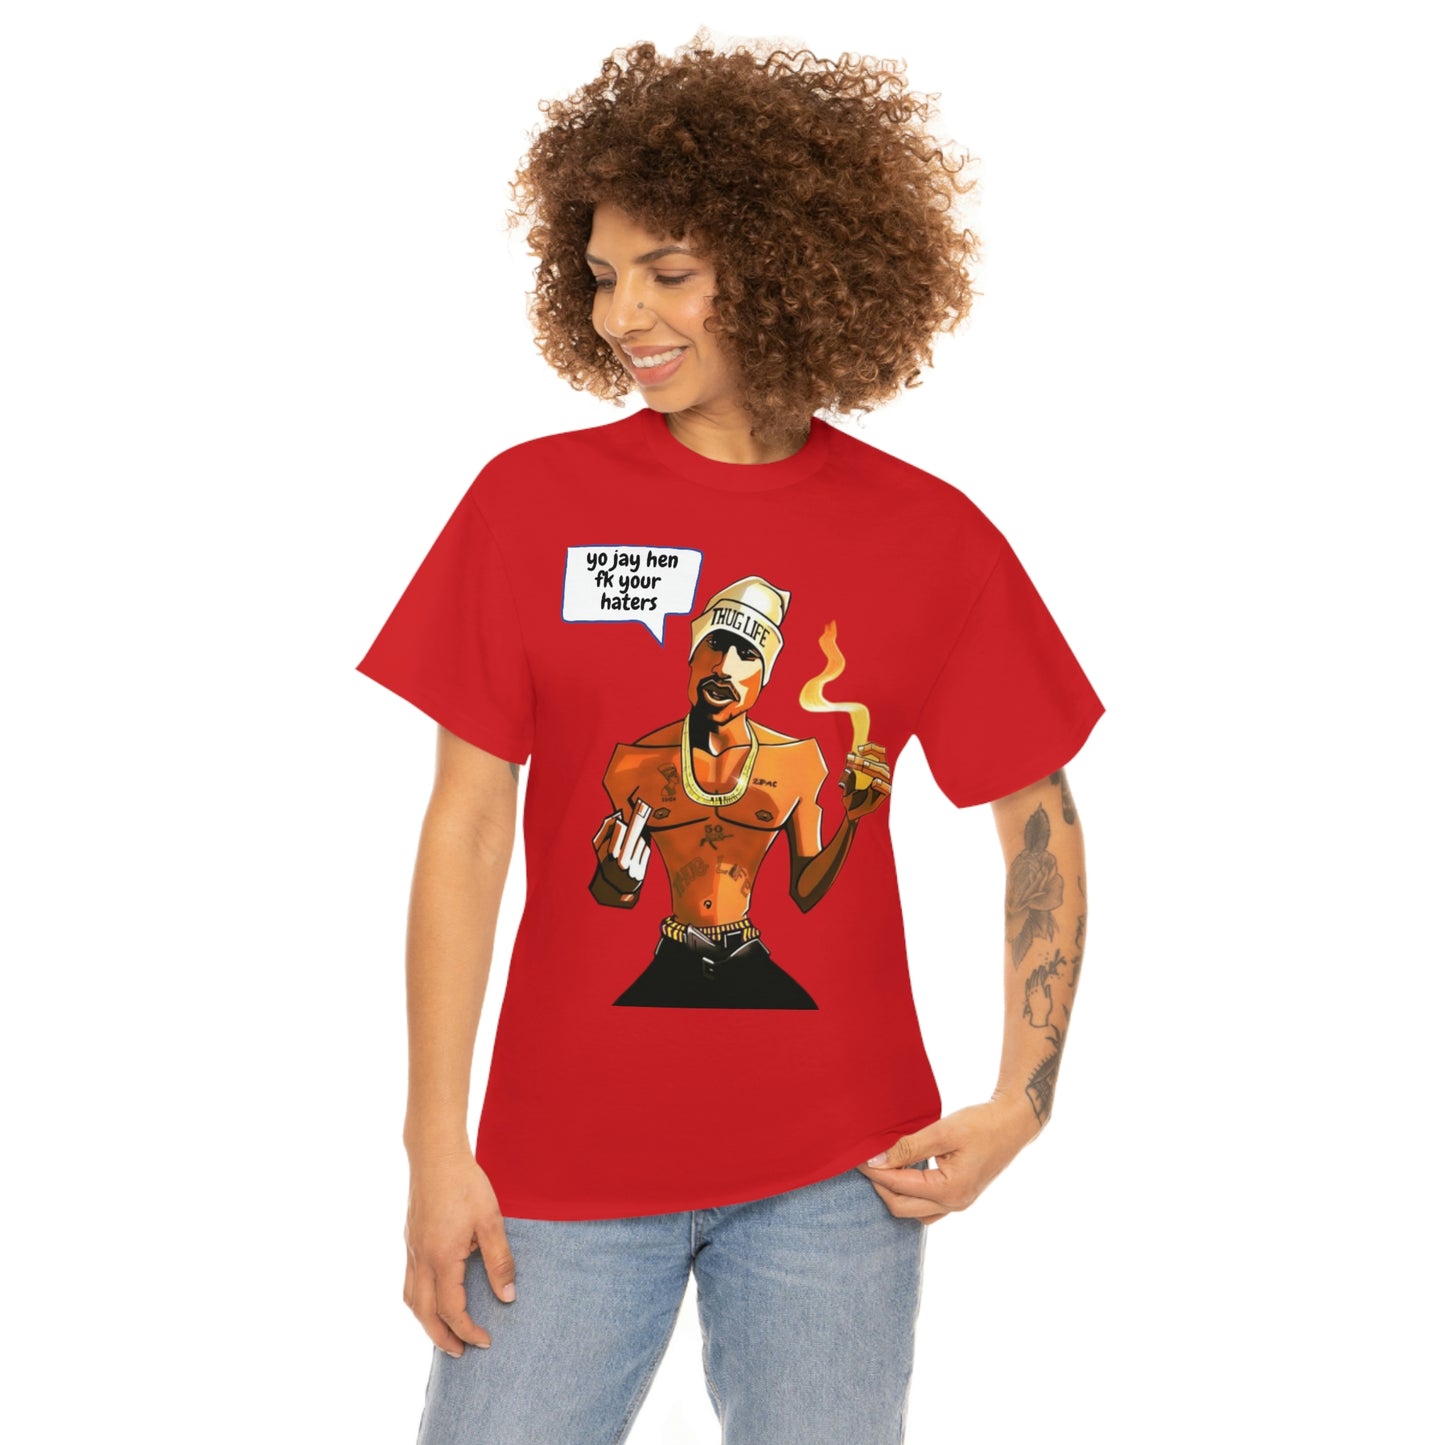 Tupac Fk Your Haters Cotton Tee - Add Your Own Name